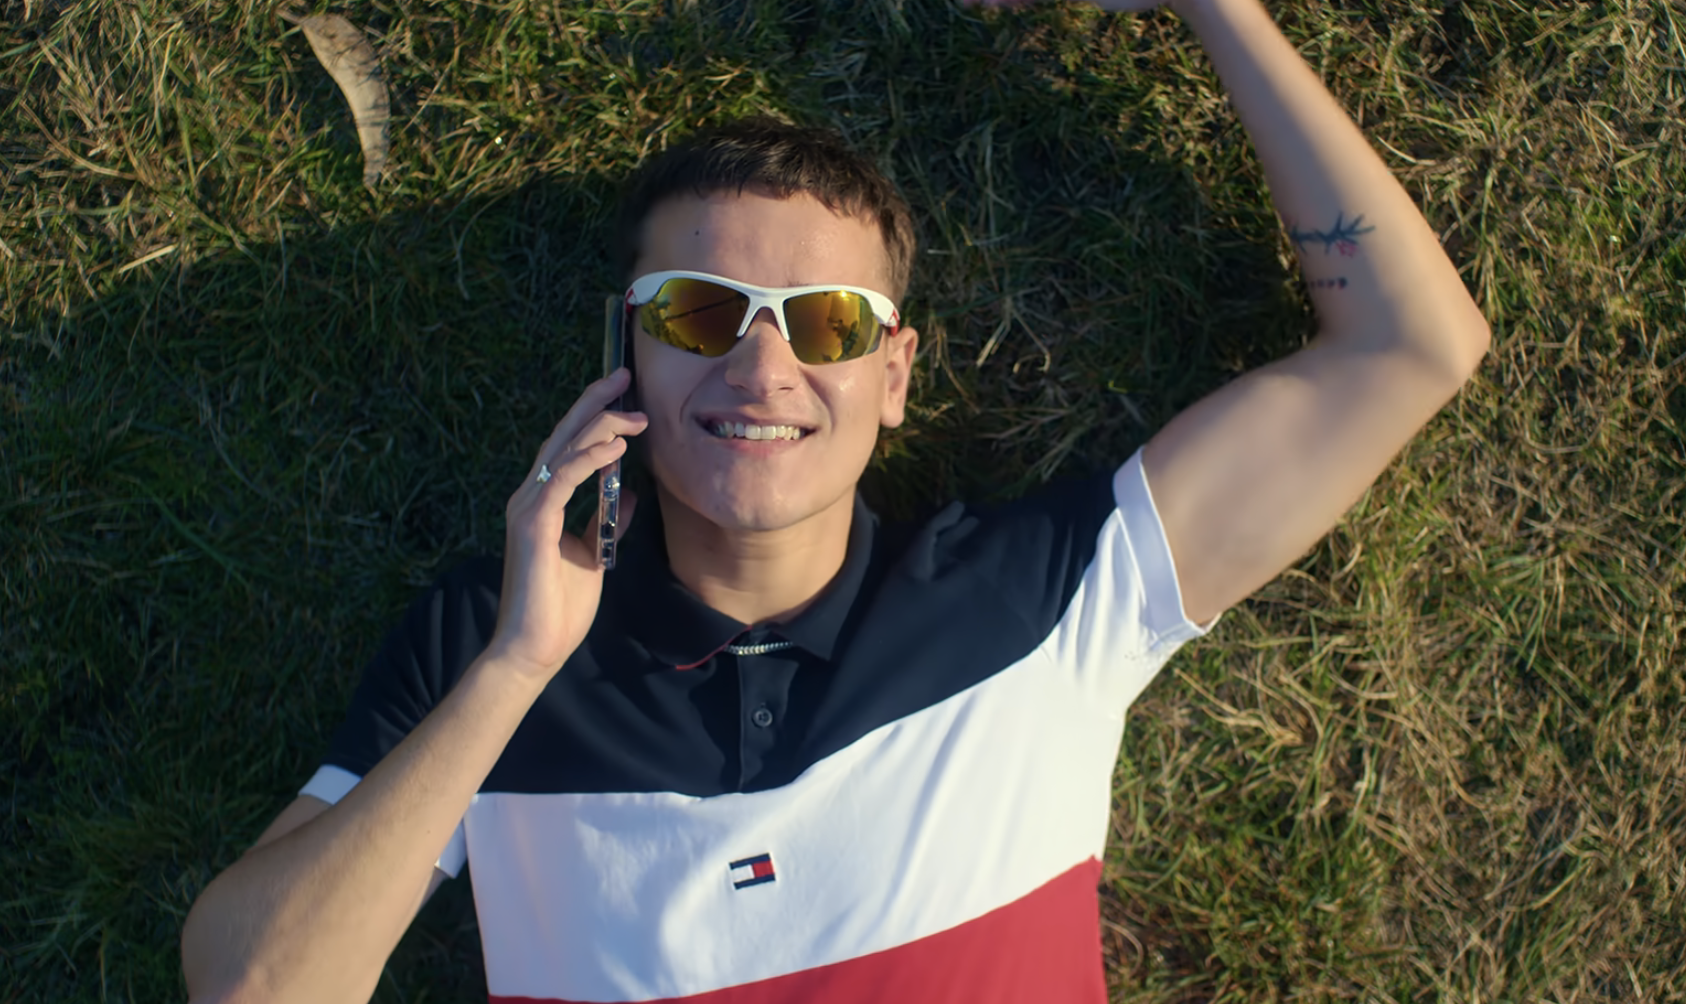 Man in Tommy Hilfiger shirt and sunglasses lying on grass, talking on phone, smiling